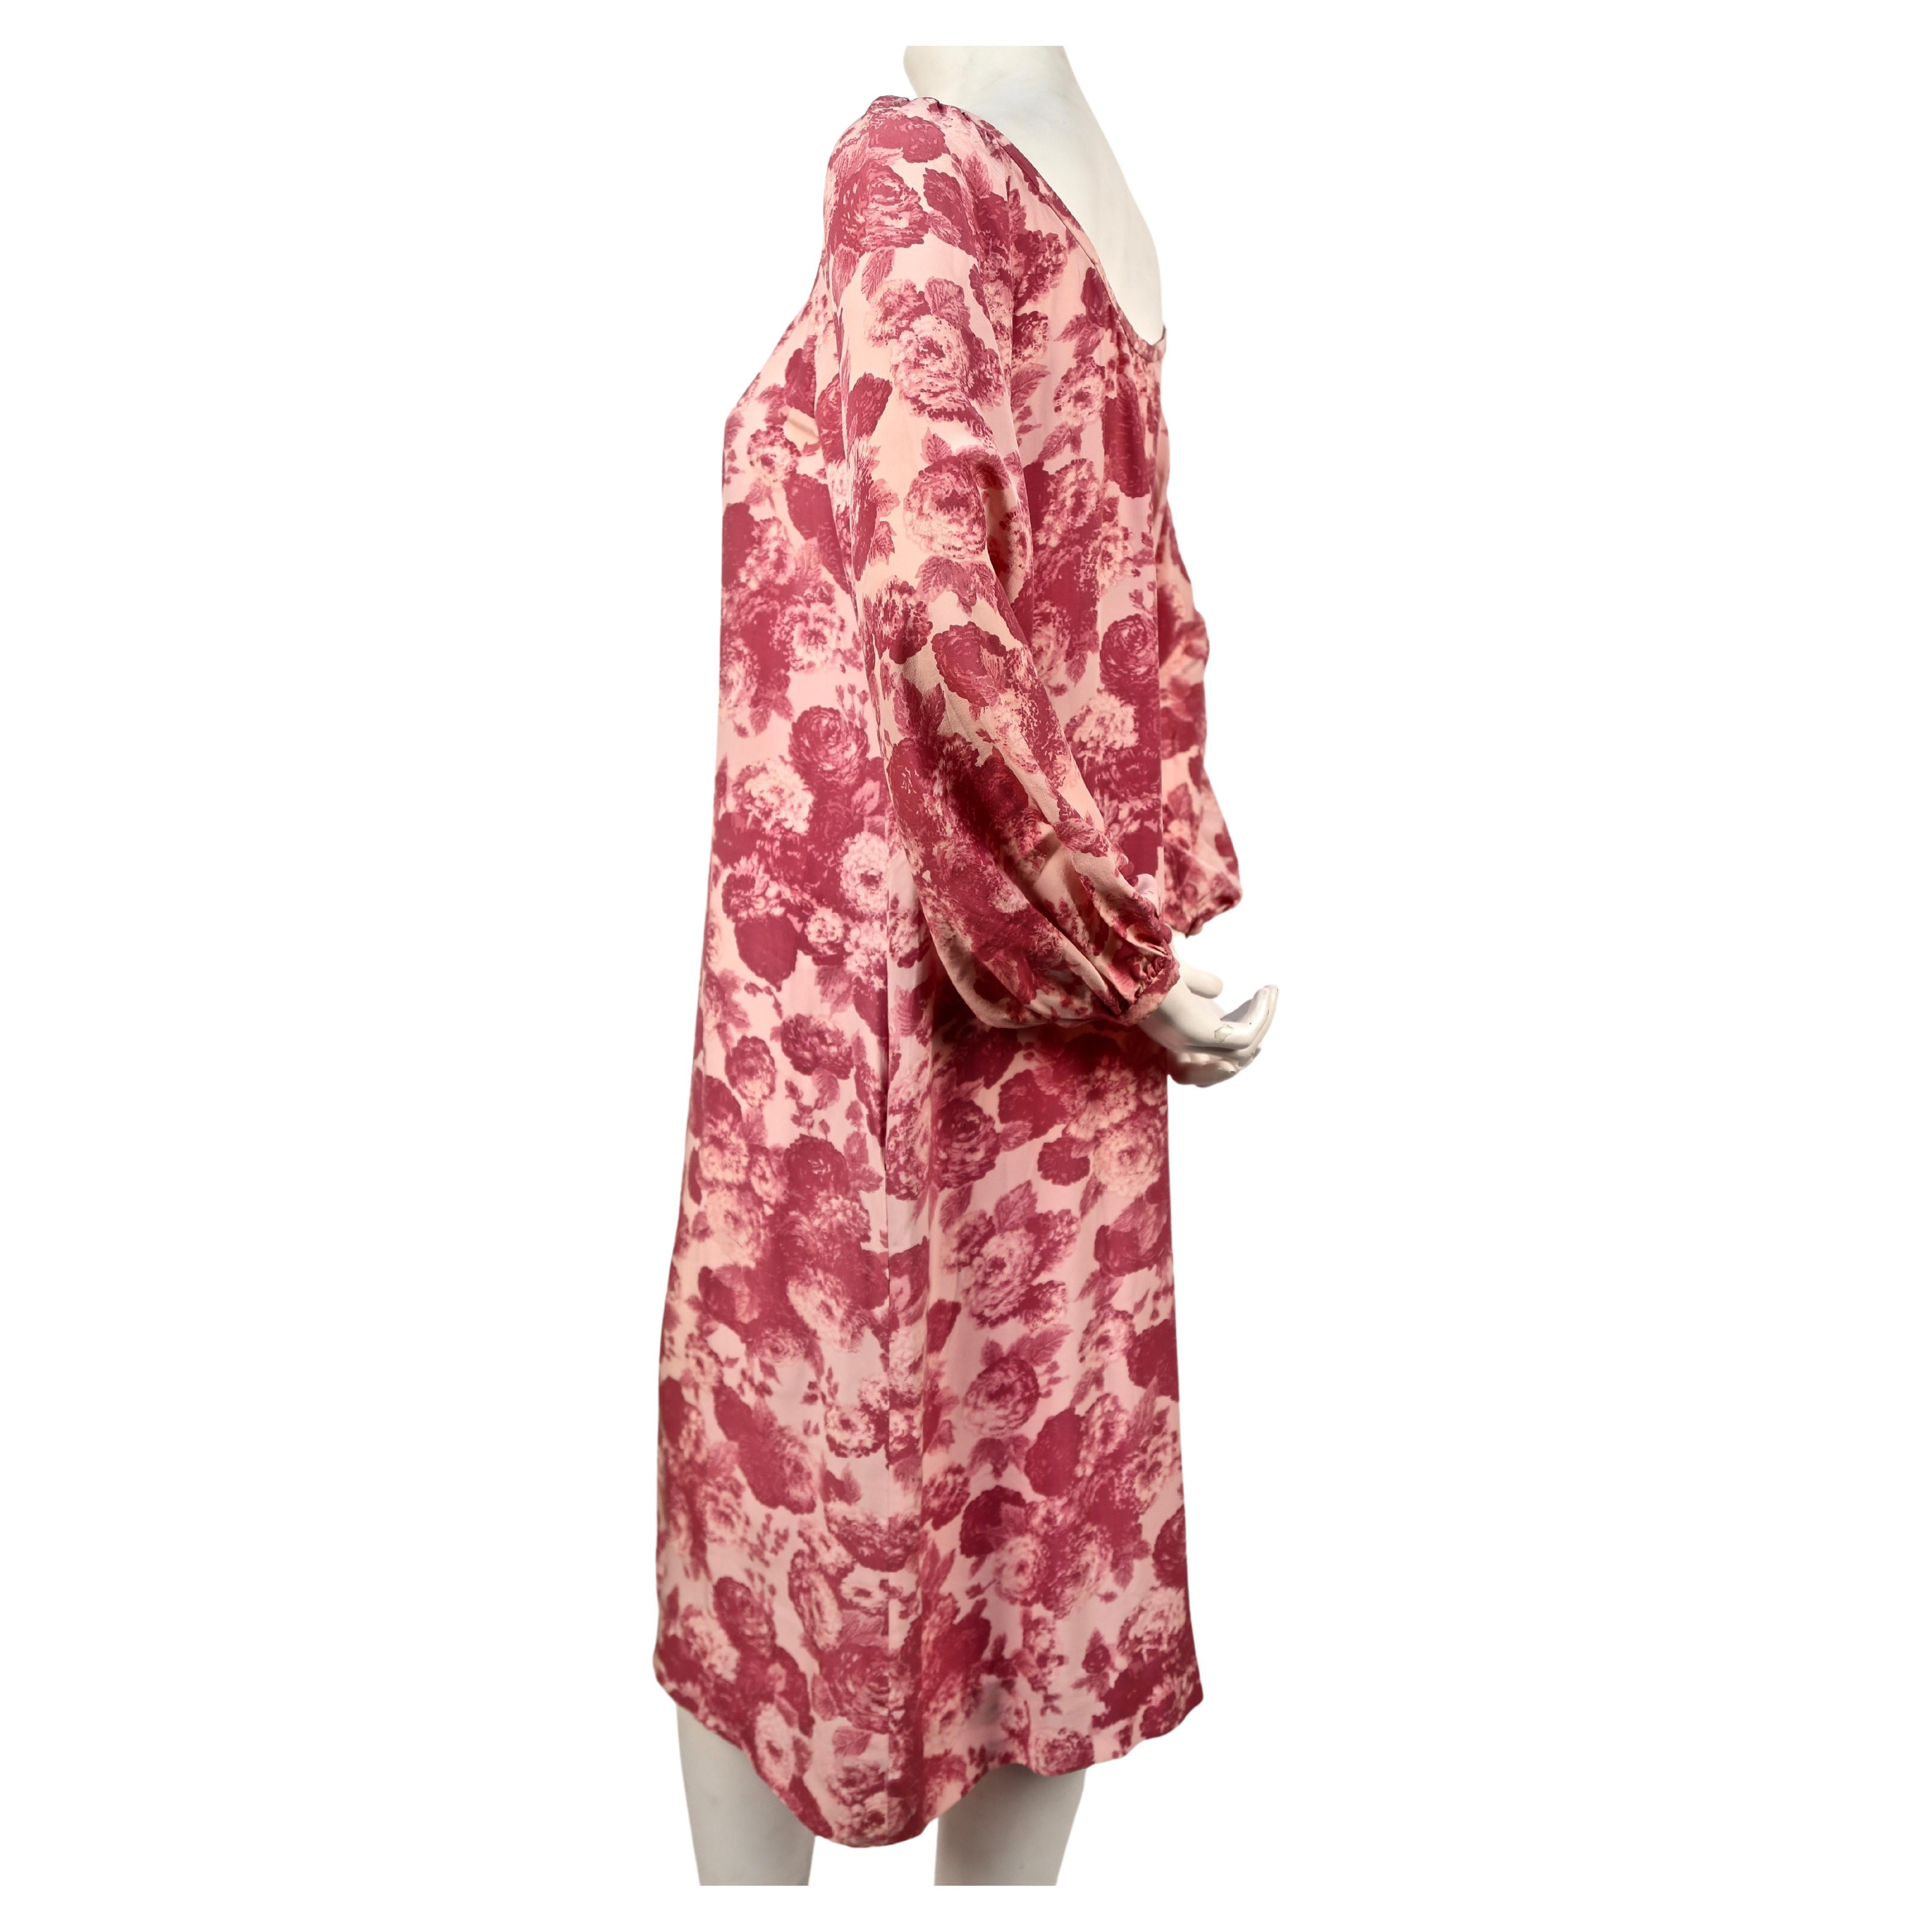 Pink, rose floral-printed, silk dress with open neckline designed by Yves Saint Laurent dating to the 1970's. Fits a US size 4-6. Approximate measurements: bust 38